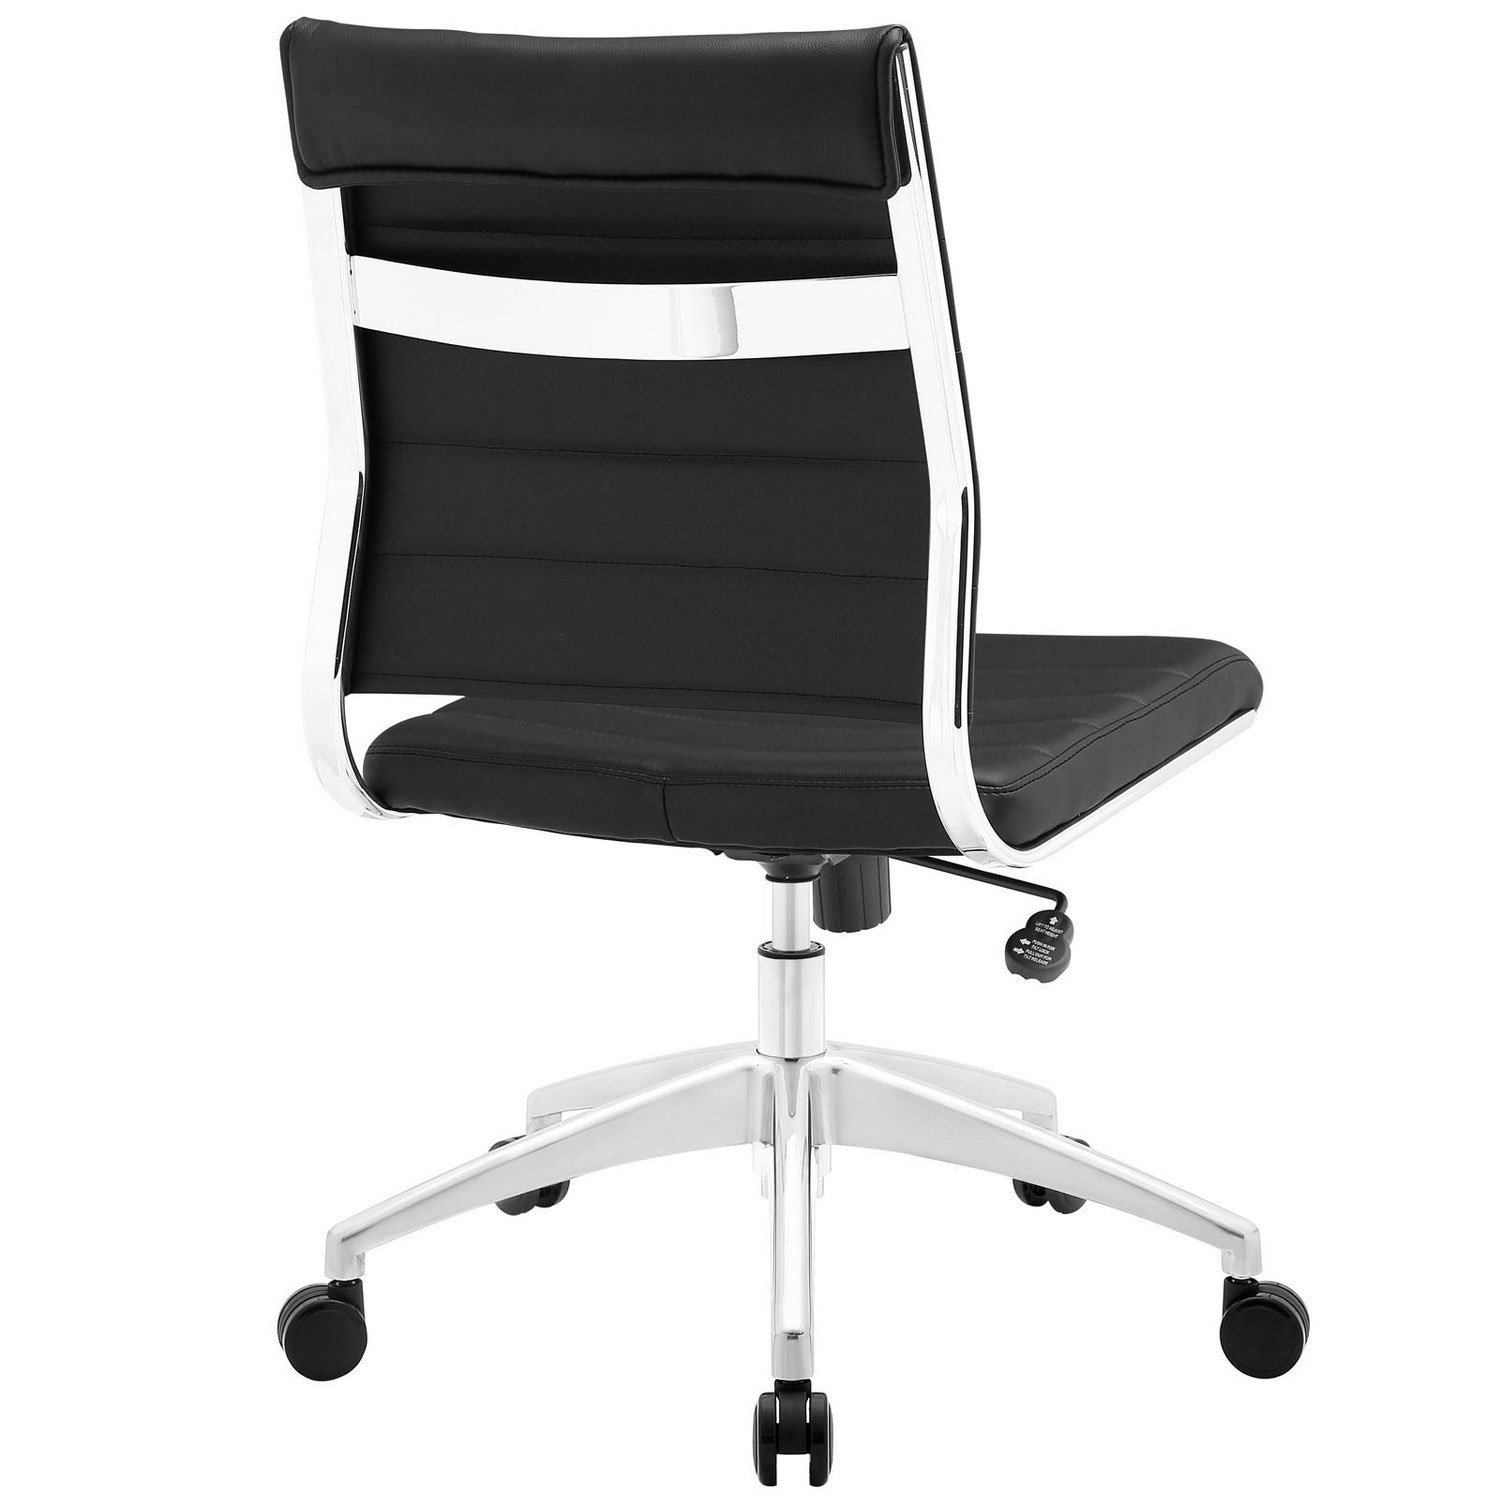 Modway Jive Armless Mid Back Office Chair - Black